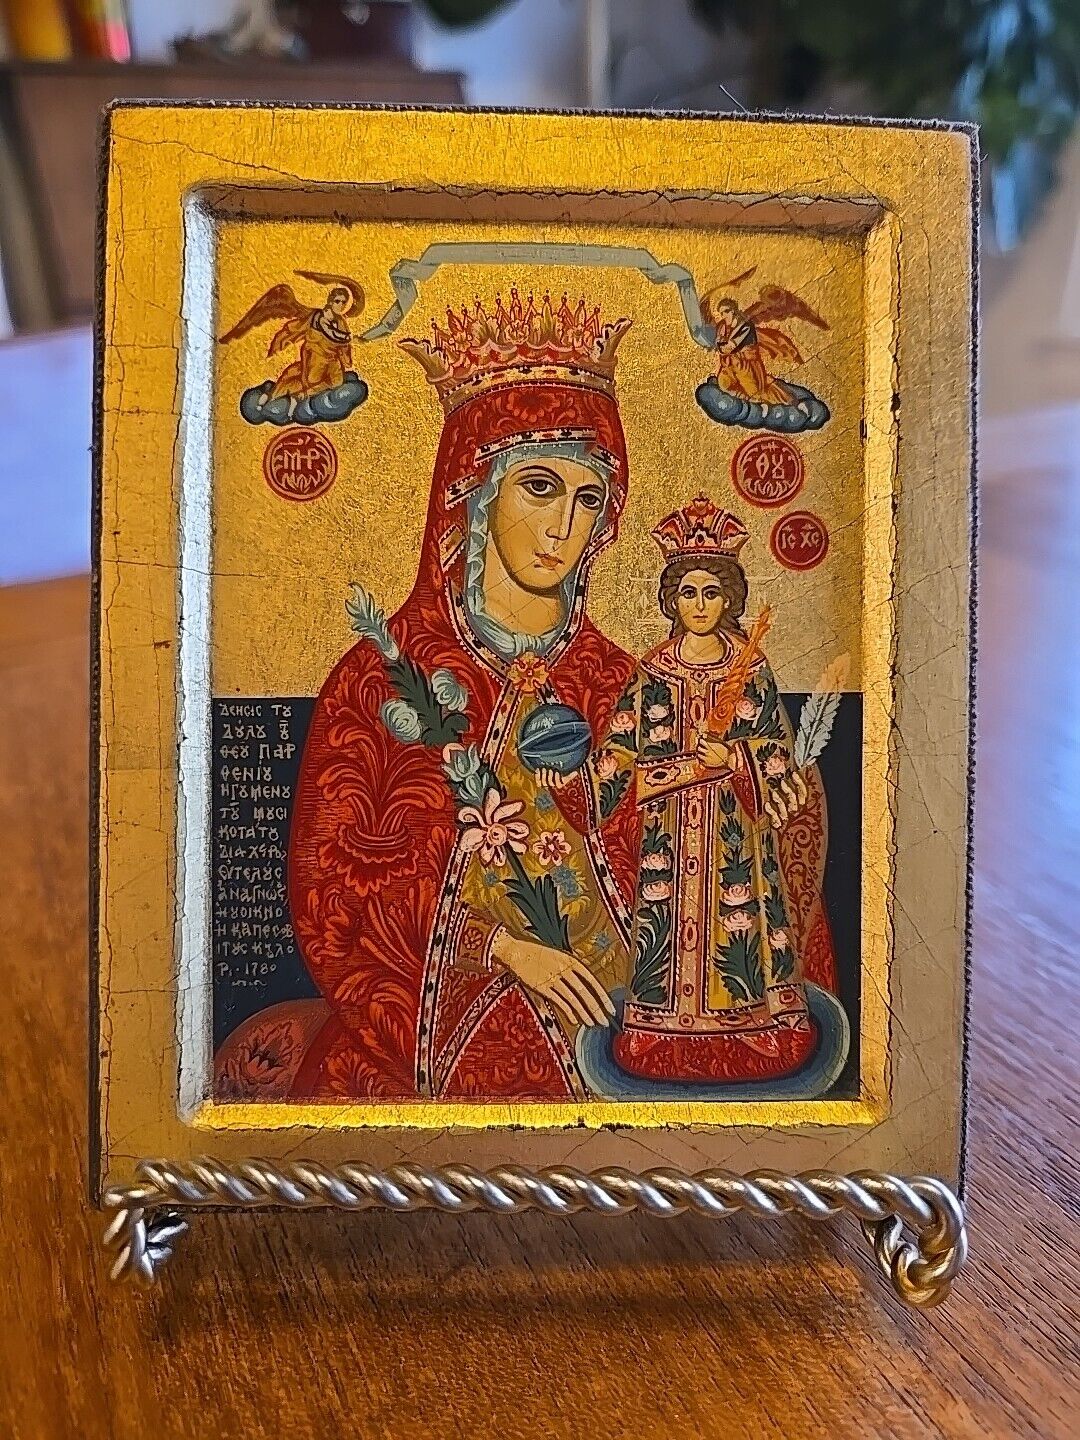 Mother of God Everlasting Rose Orthodox Icon Wall-Hanging Byzantine By Jcono.